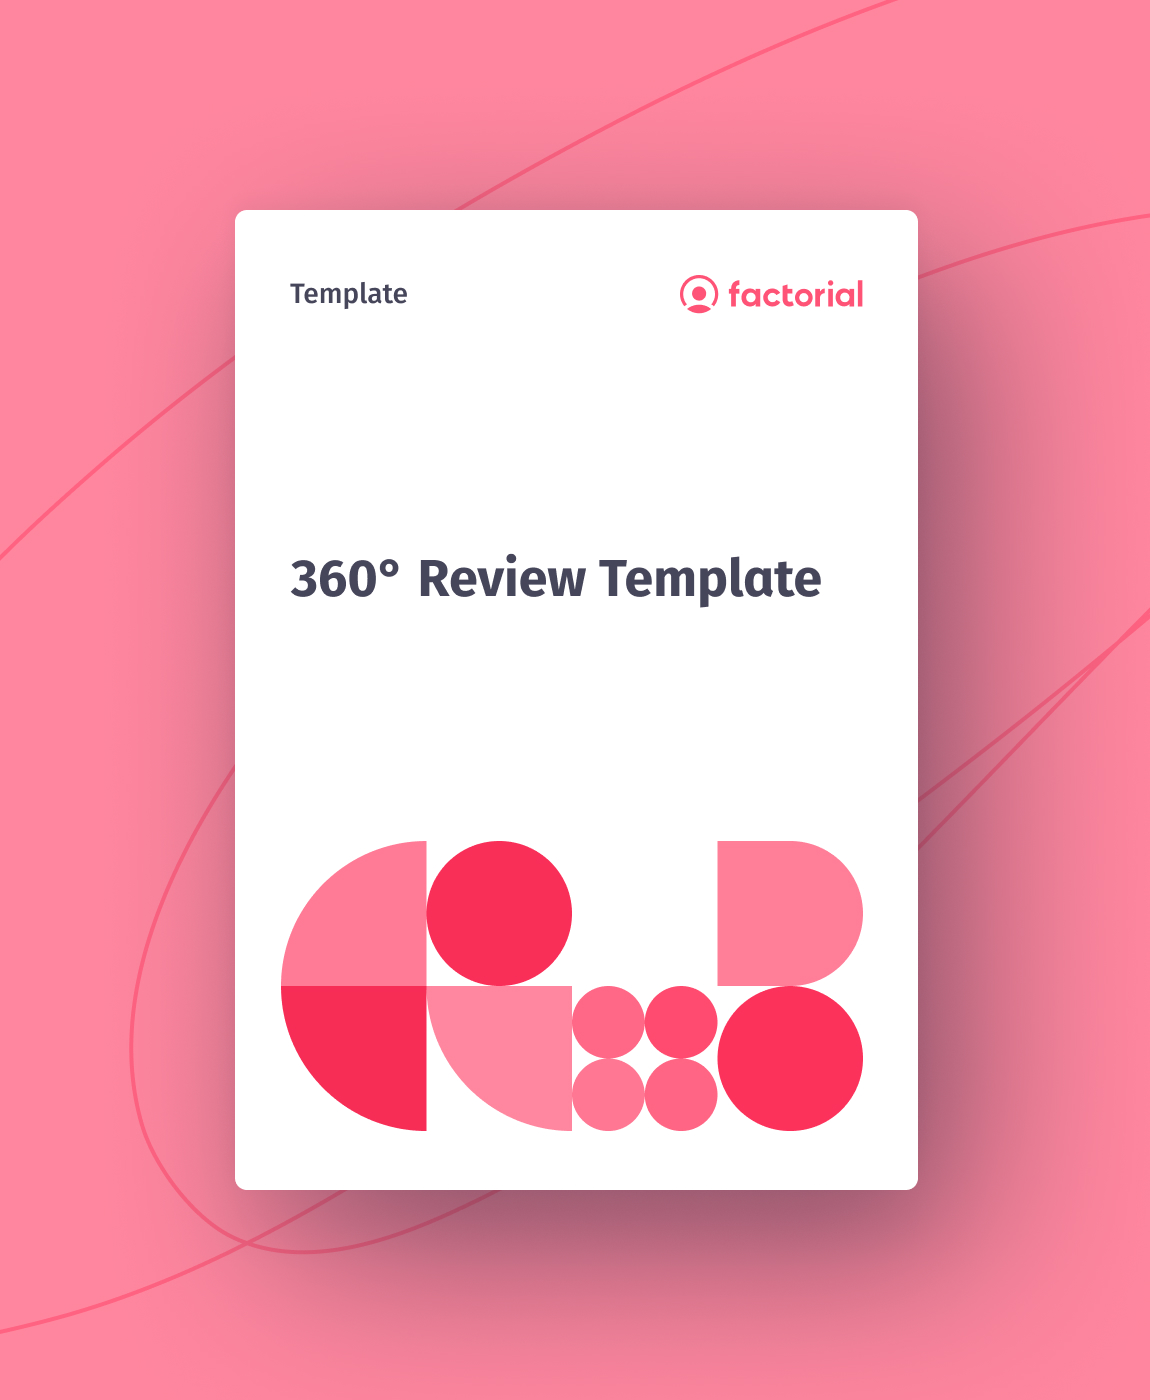 download-your-360-review-template